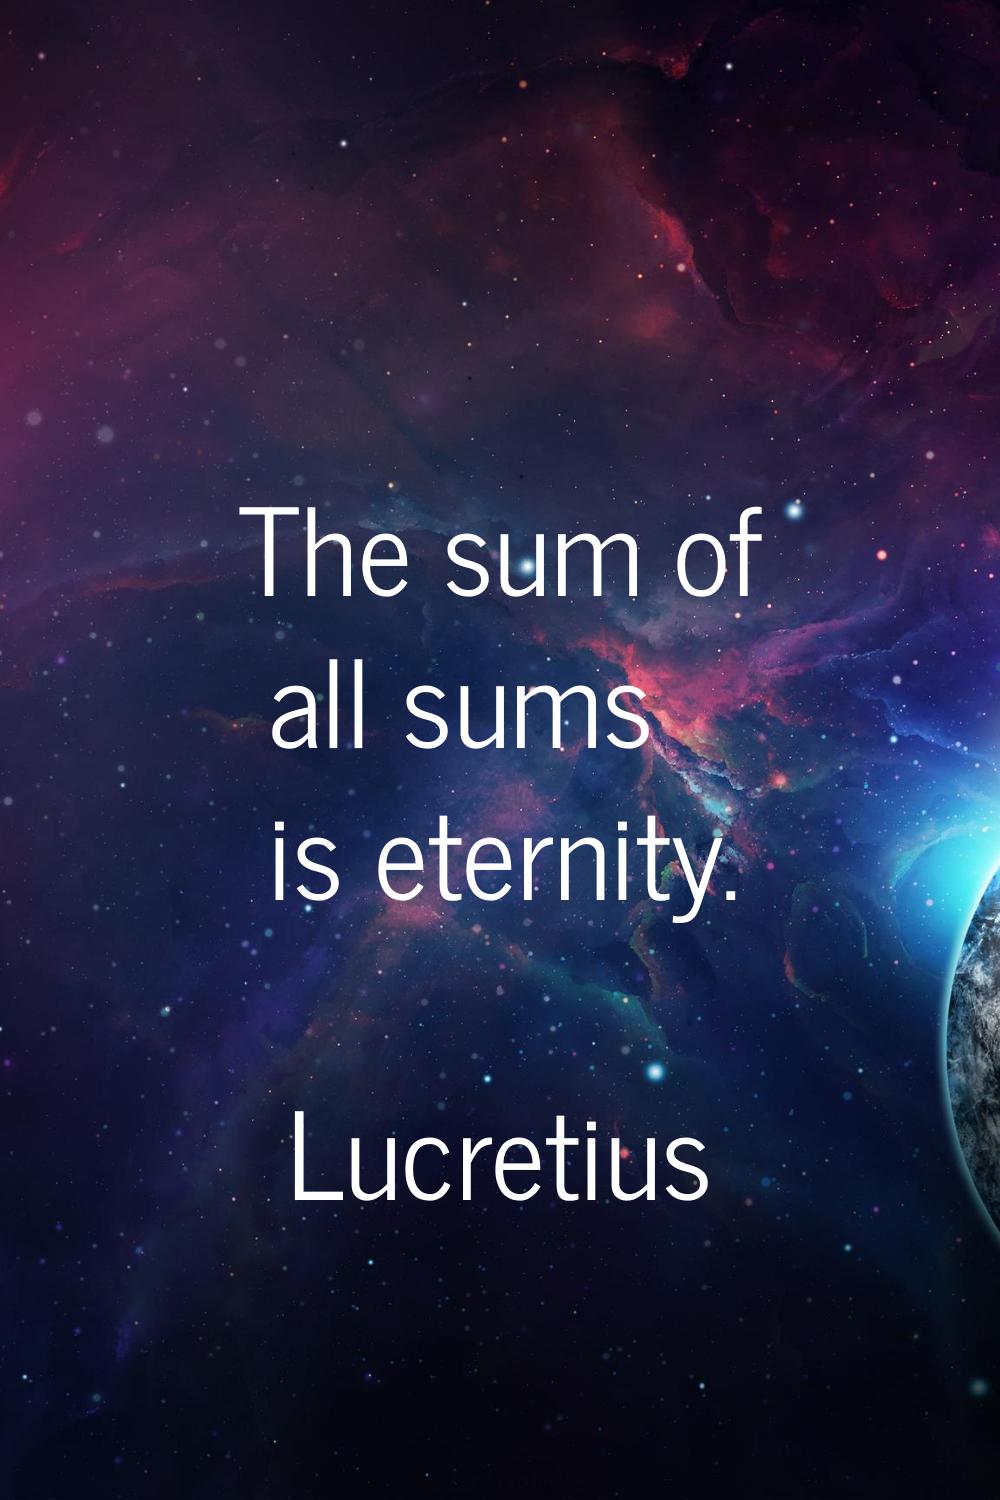 The sum of all sums is eternity.